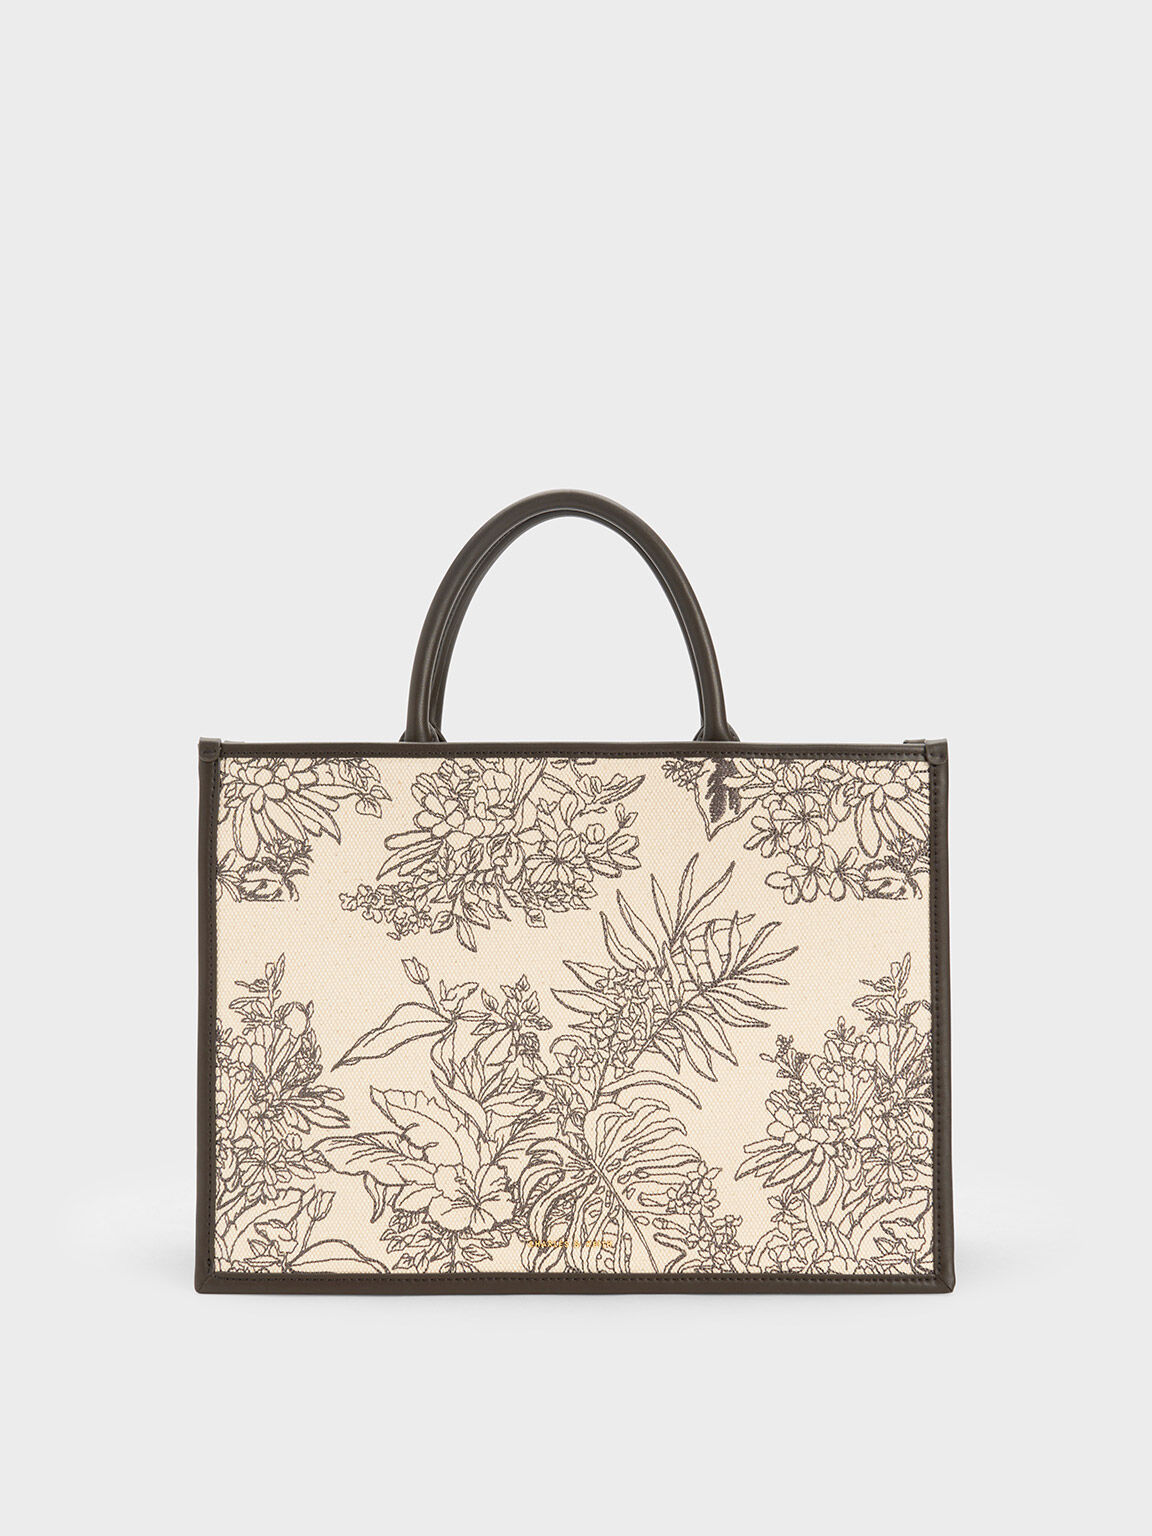 Dolce & Gabbana, Fabric tote bag with Chinese print - Unique Designer Pieces